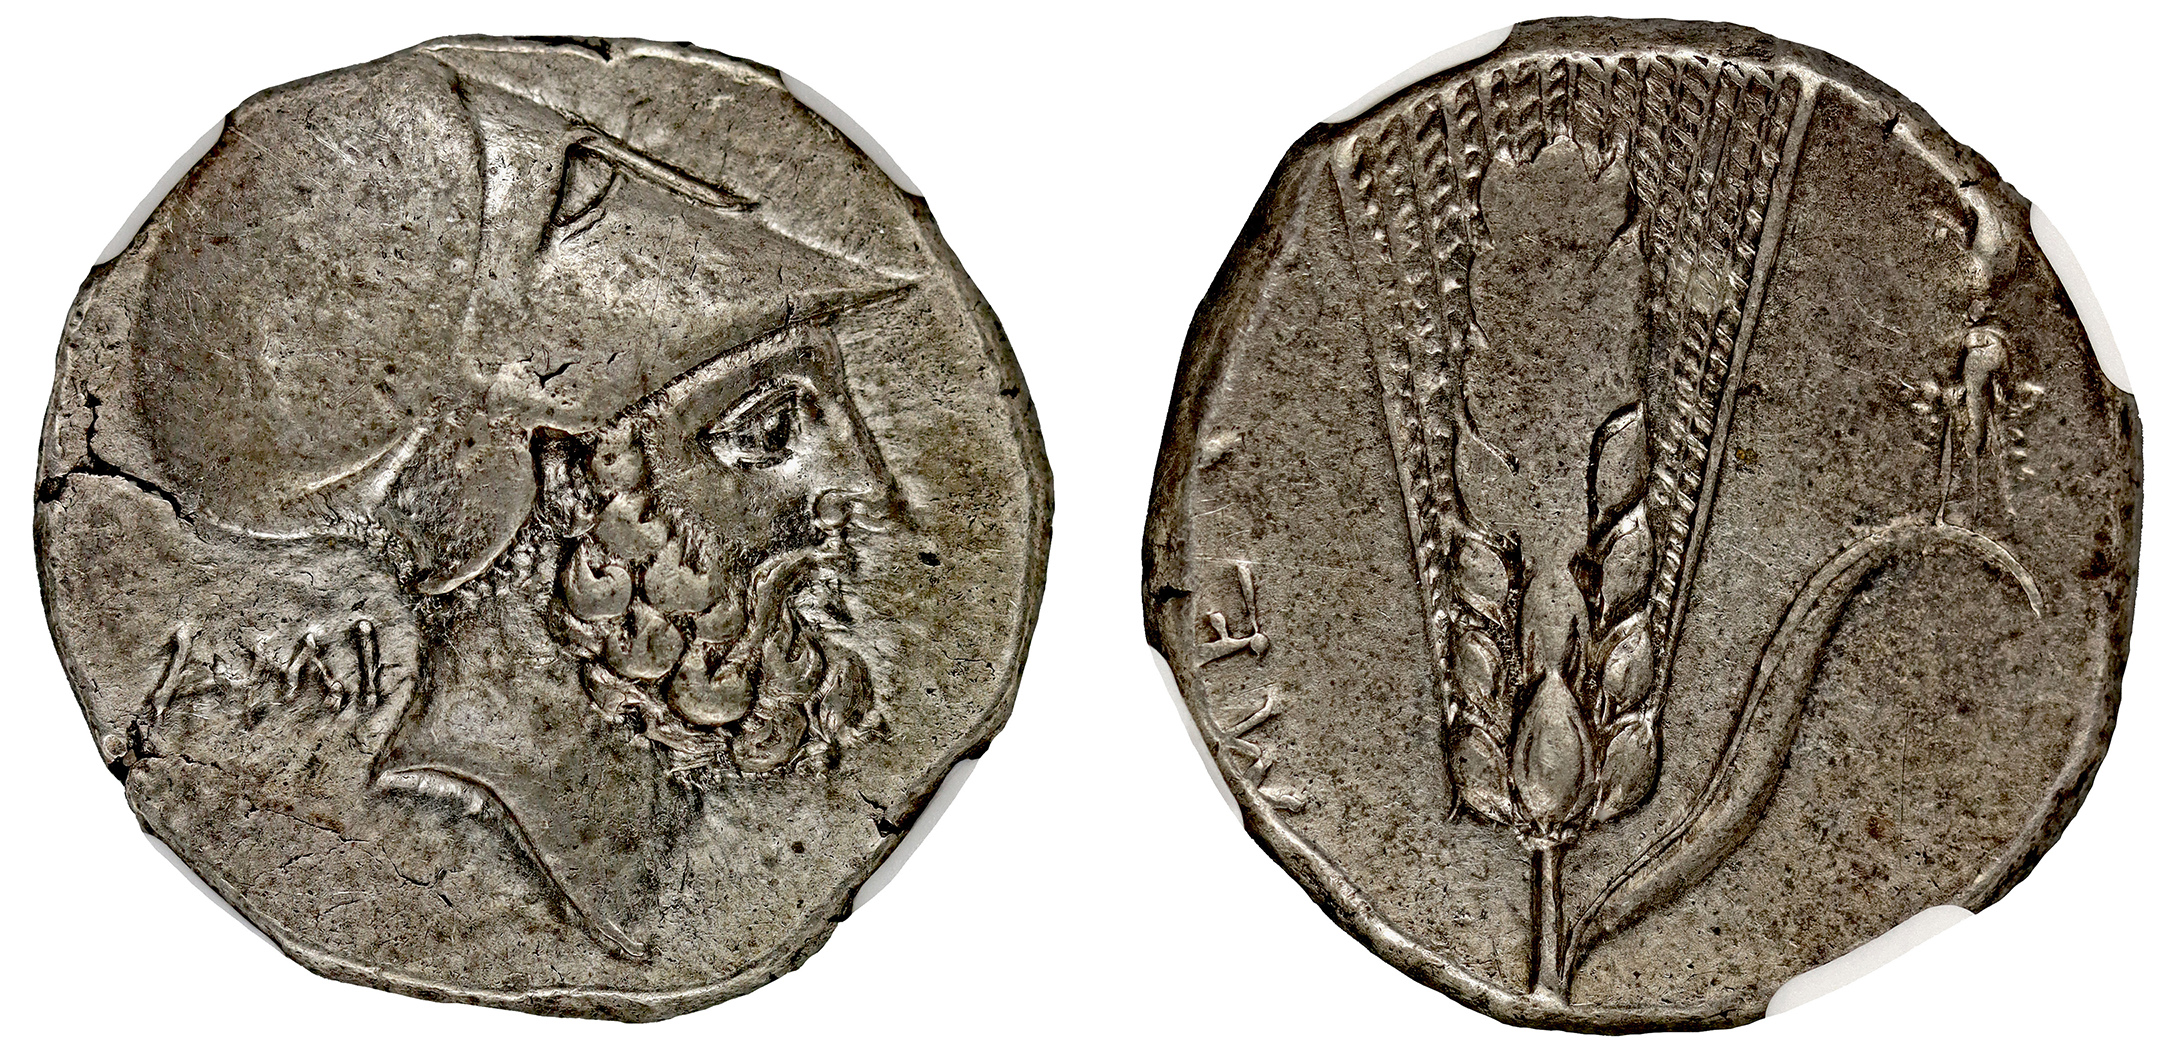 † Italy, Lucania, Metapontum, silver Stater, c. 340-330 BC, head of Leukippos right, wearing